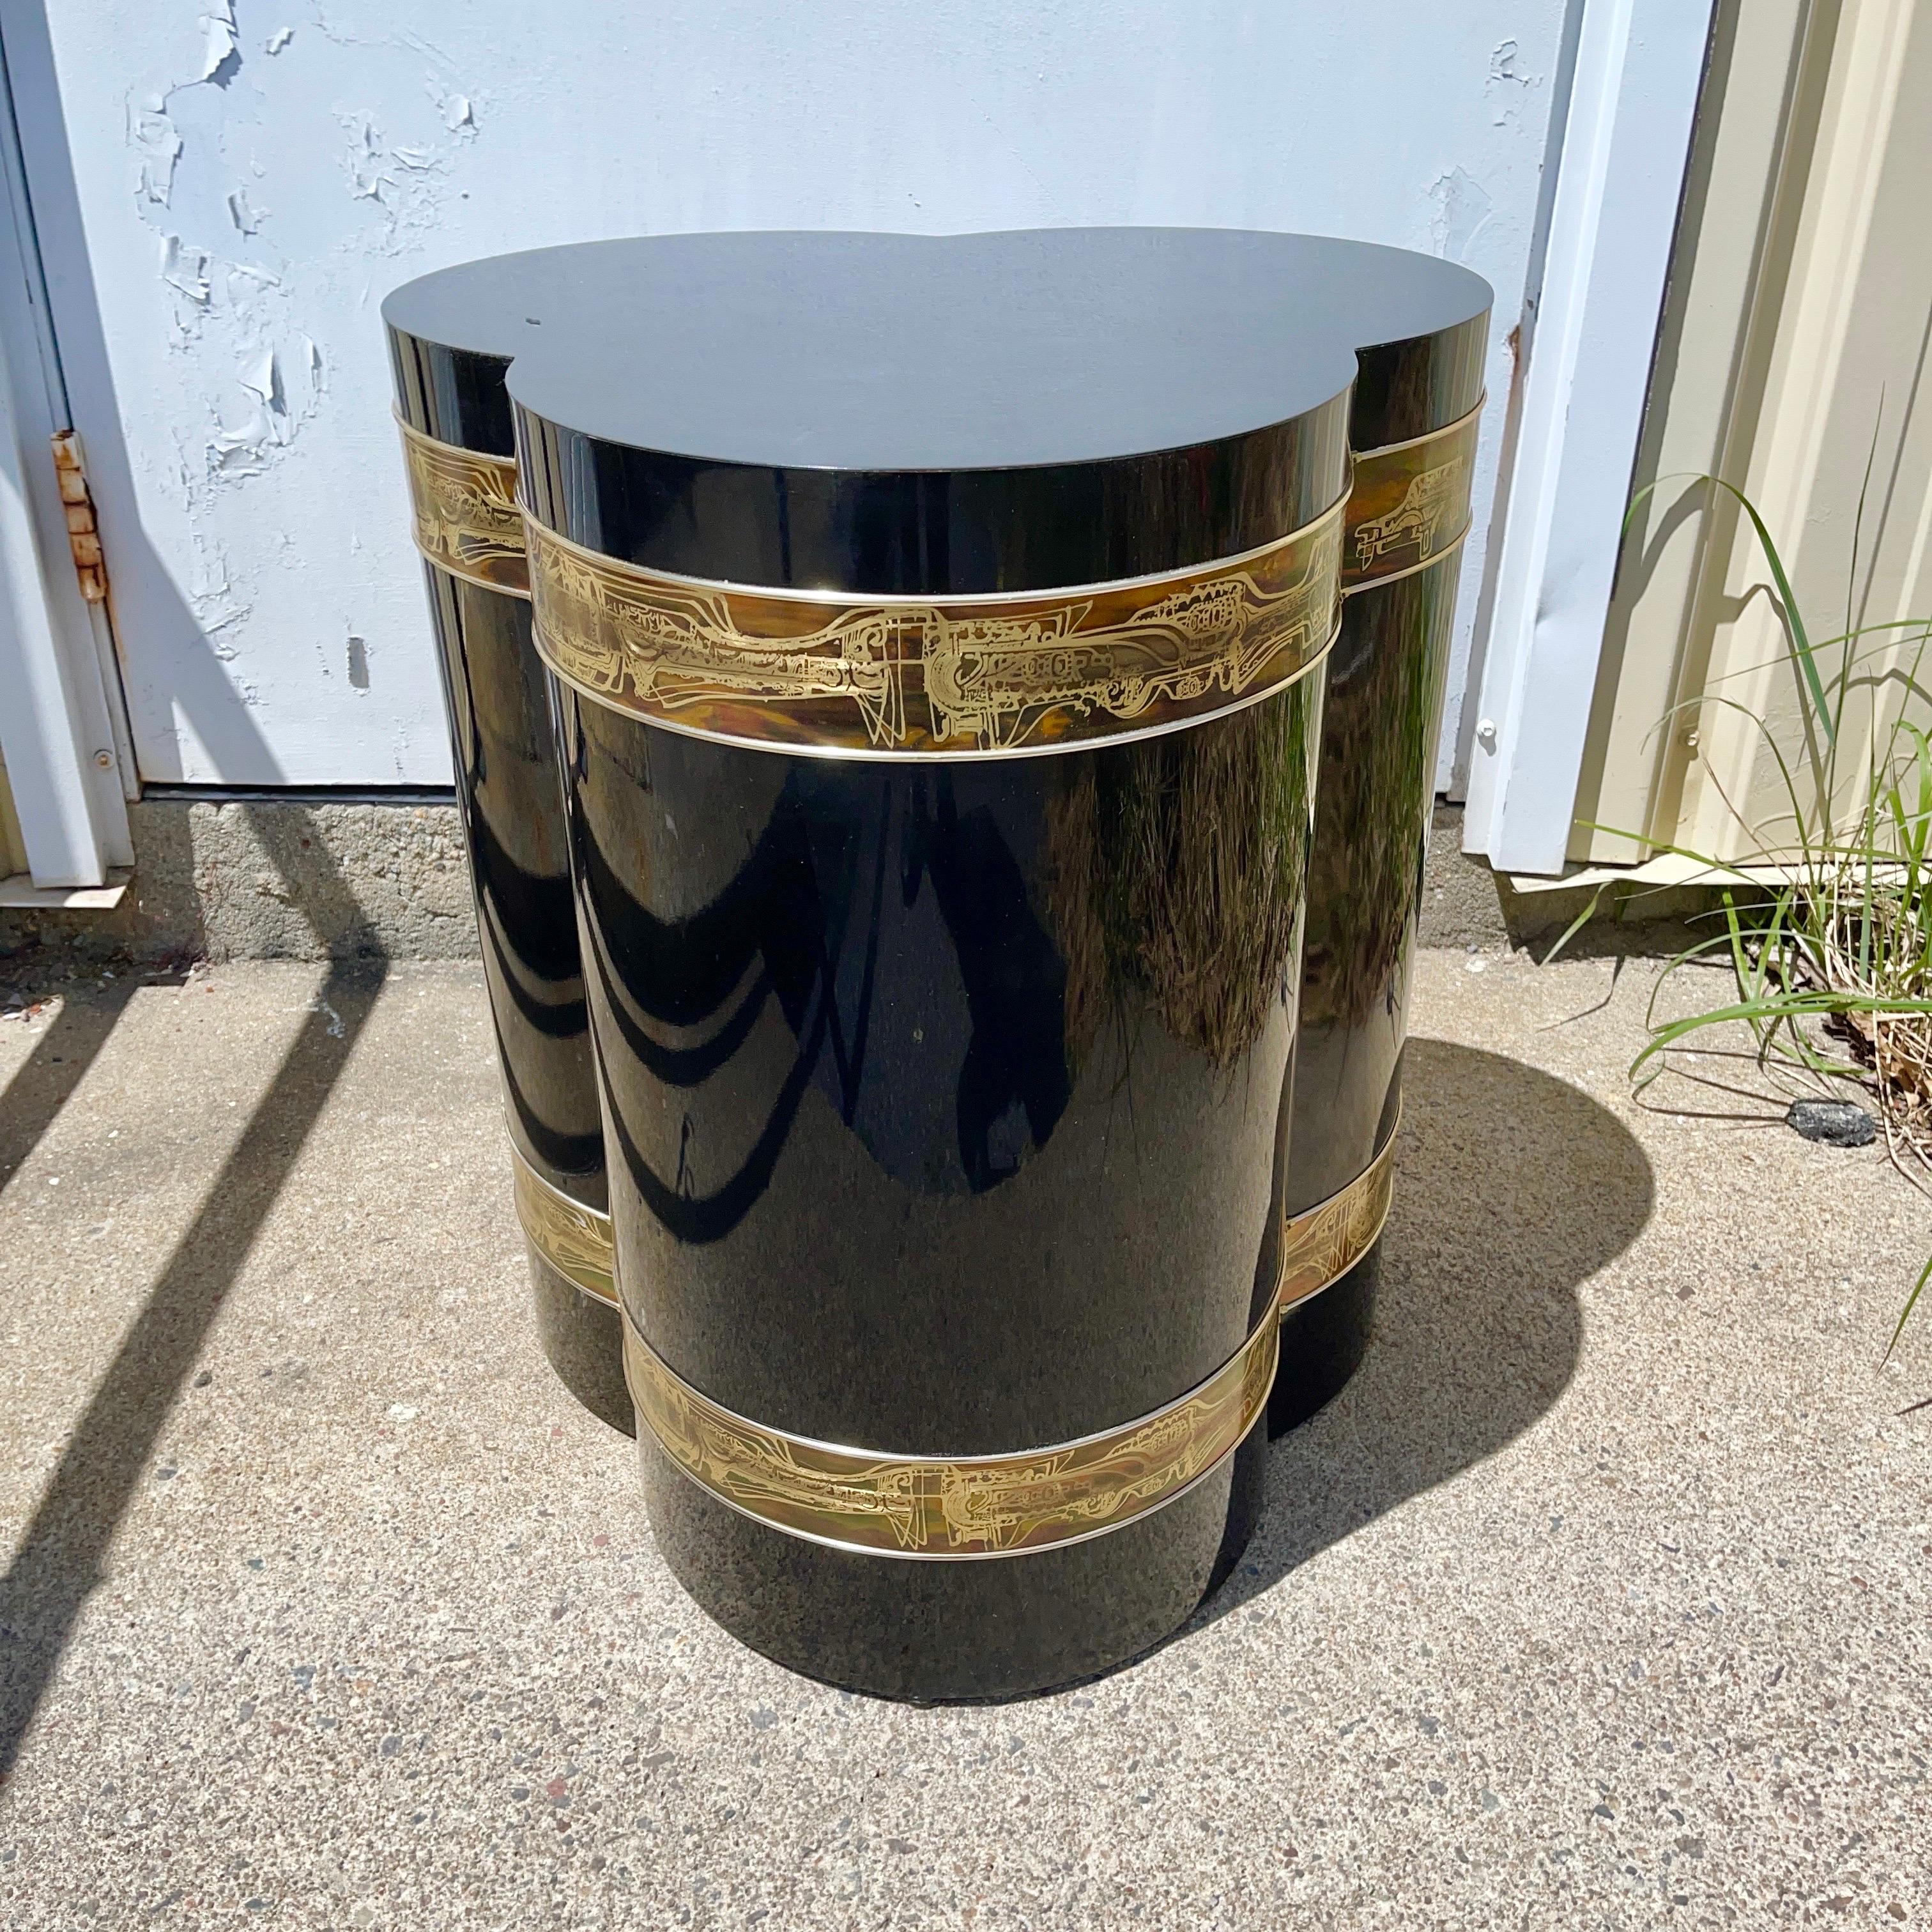 Mastercraft Furniture model 1611 lamp table in trefoil form in high luster black lacquered wood double banded by acid etched brass art metal by sculptor Bernhard Rohne. 24” high by 21” diameter. 


 